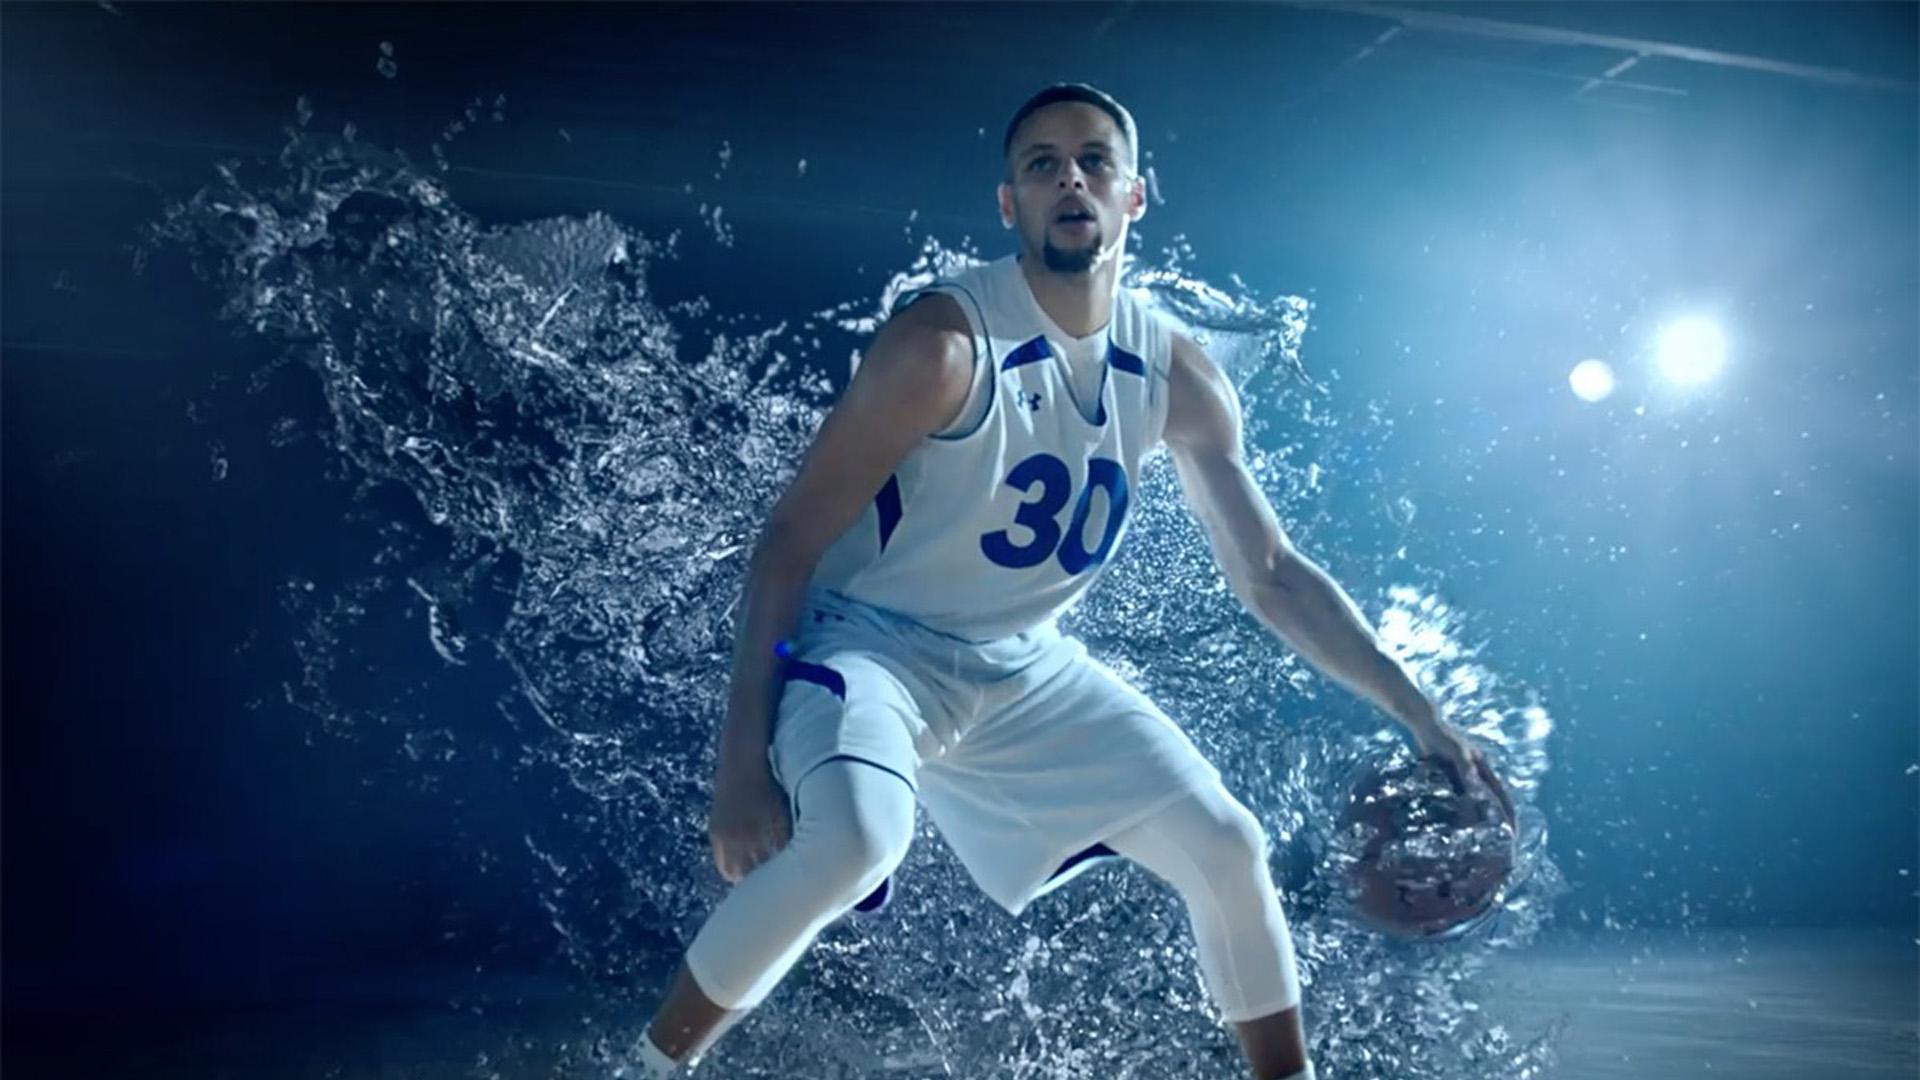 Stephen Curry Is Standing In Water Splash Wallpaper Wearing White Sports Dress 2K Stephen Curry